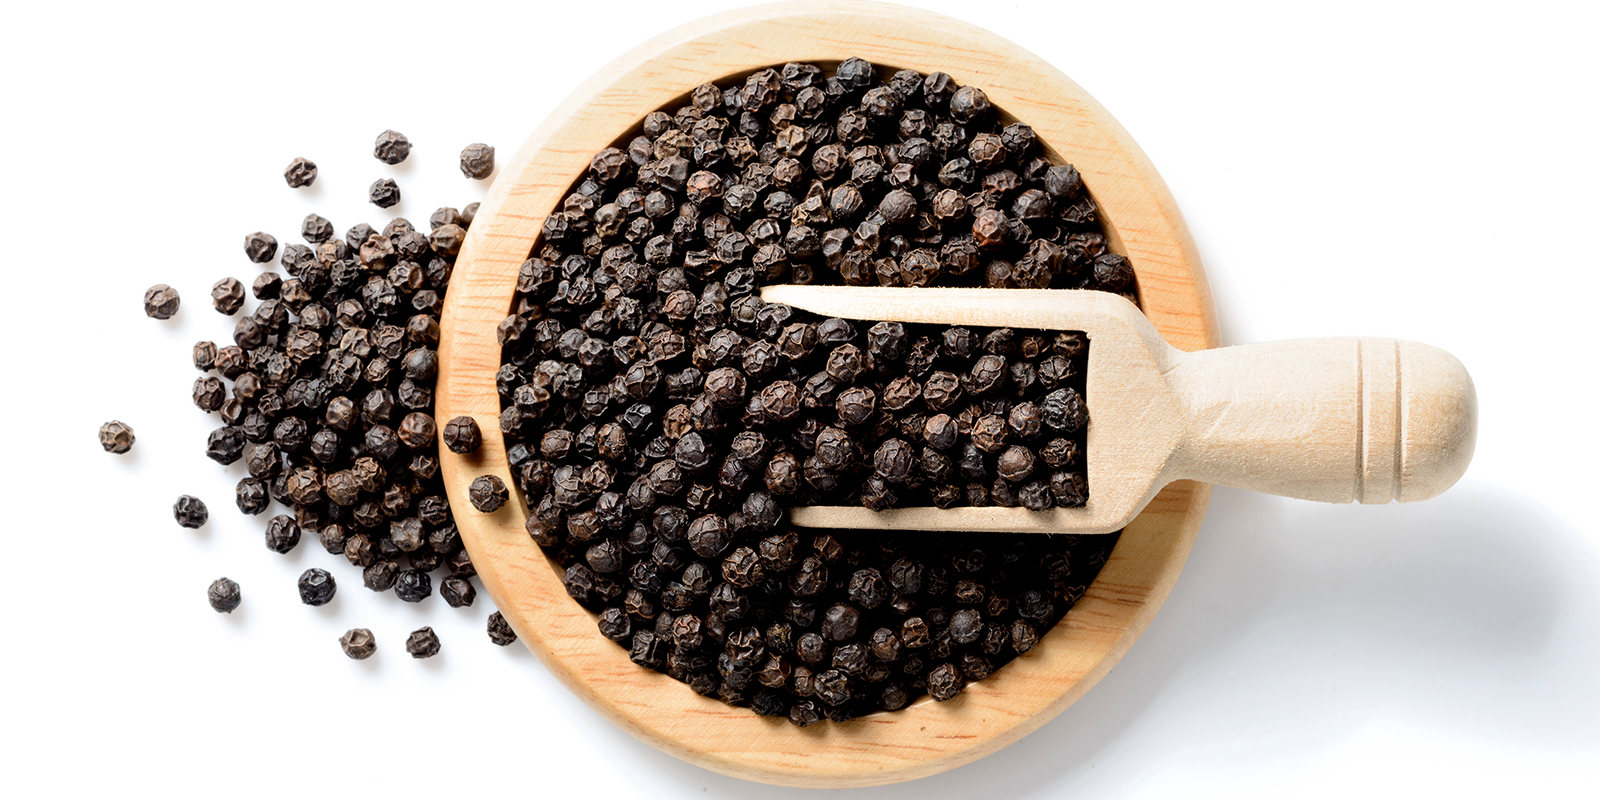 Black pepper: how does it impact testosterone